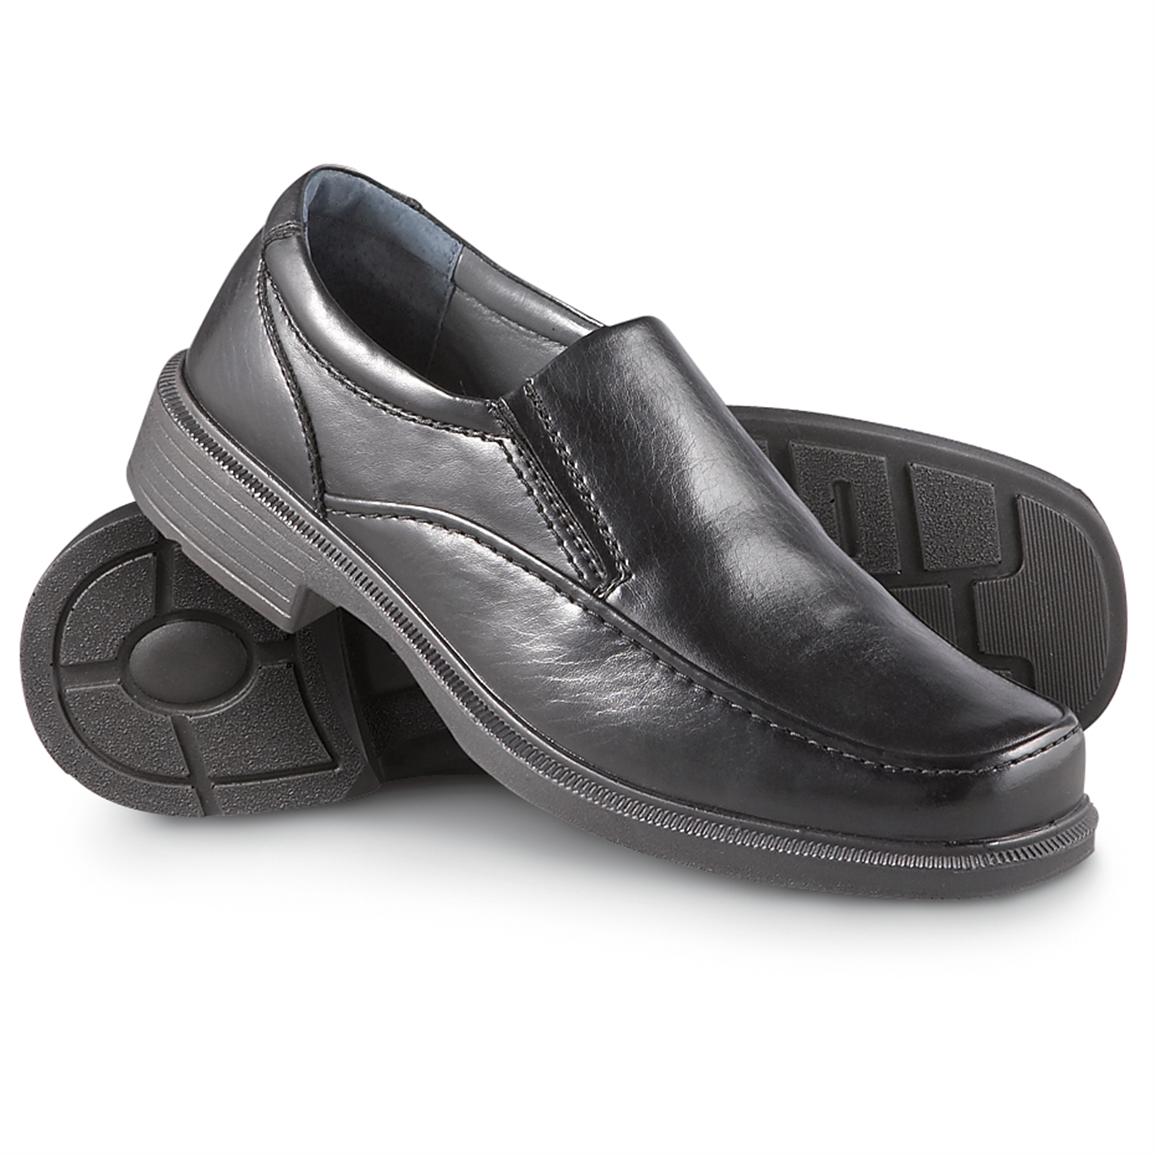 soft stags dress shoes